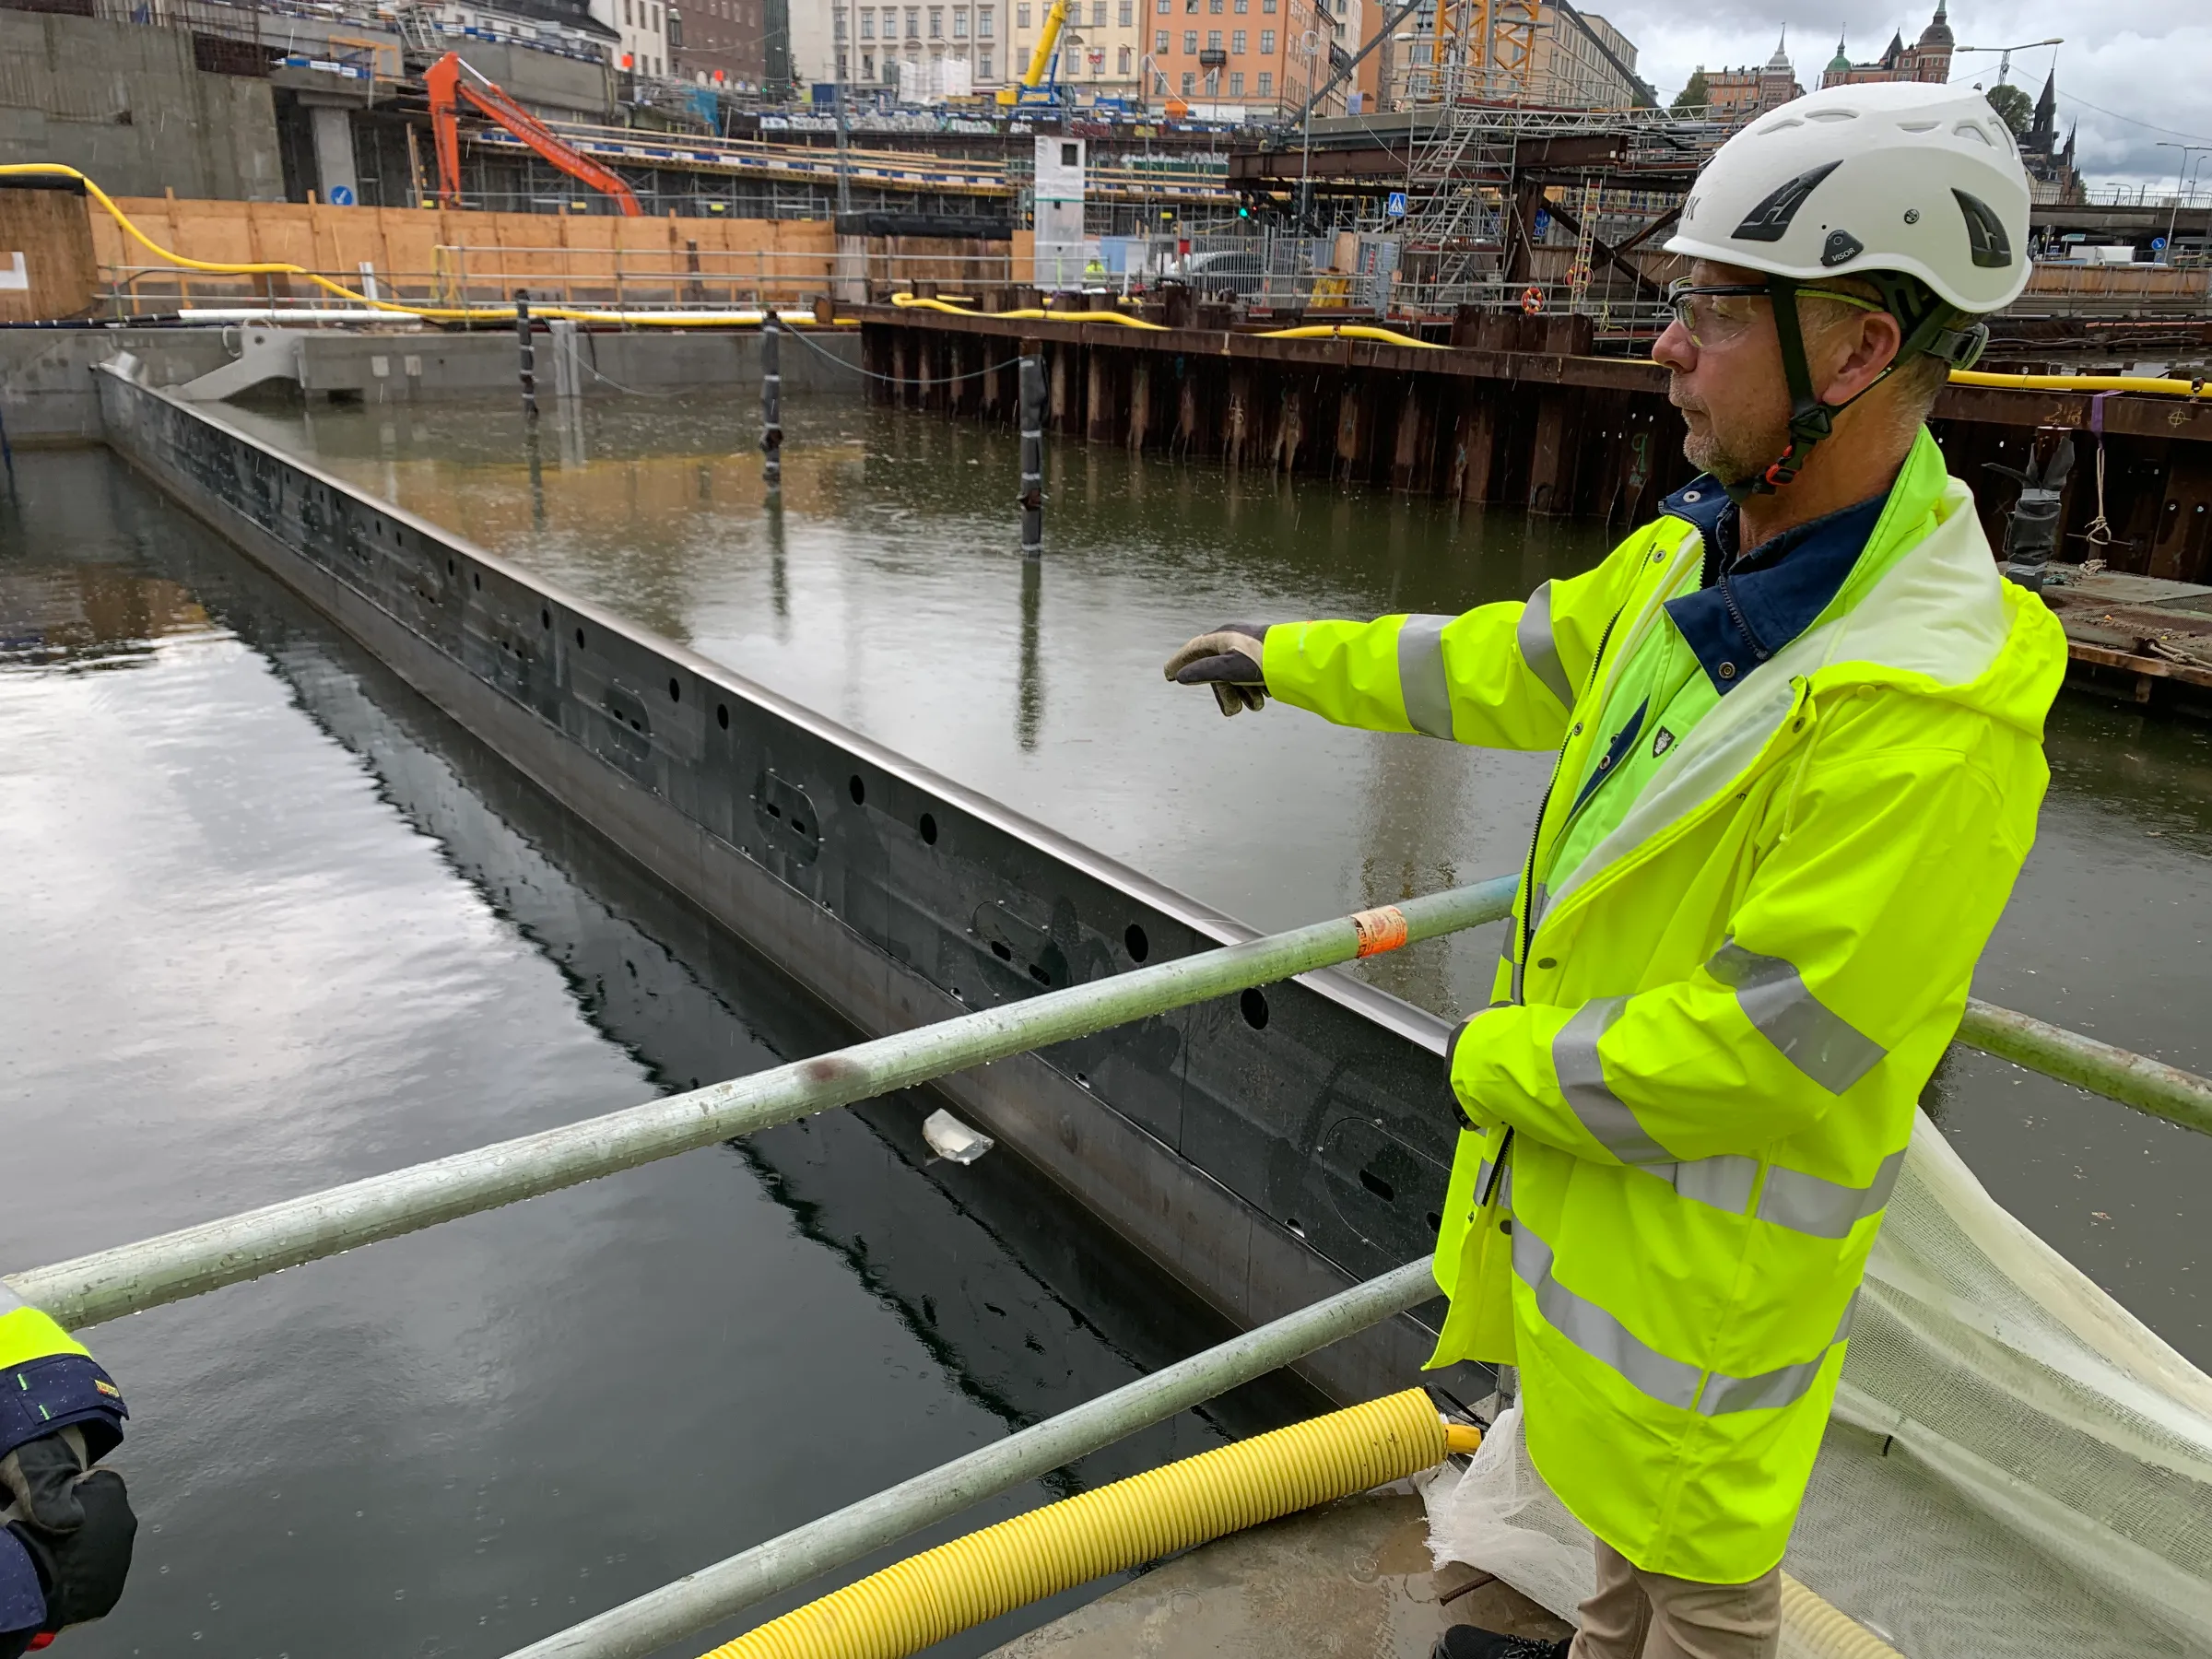 Magnus Tengblad, coordinating construction manager water for the Slussen project in Stockholm, Sweden,  points to a new sluice gate separating the fresh water of Lake Malaren (right), which is 70 cm higher than the Baltic Sea (left) as part of a renovation, September 16, 2022